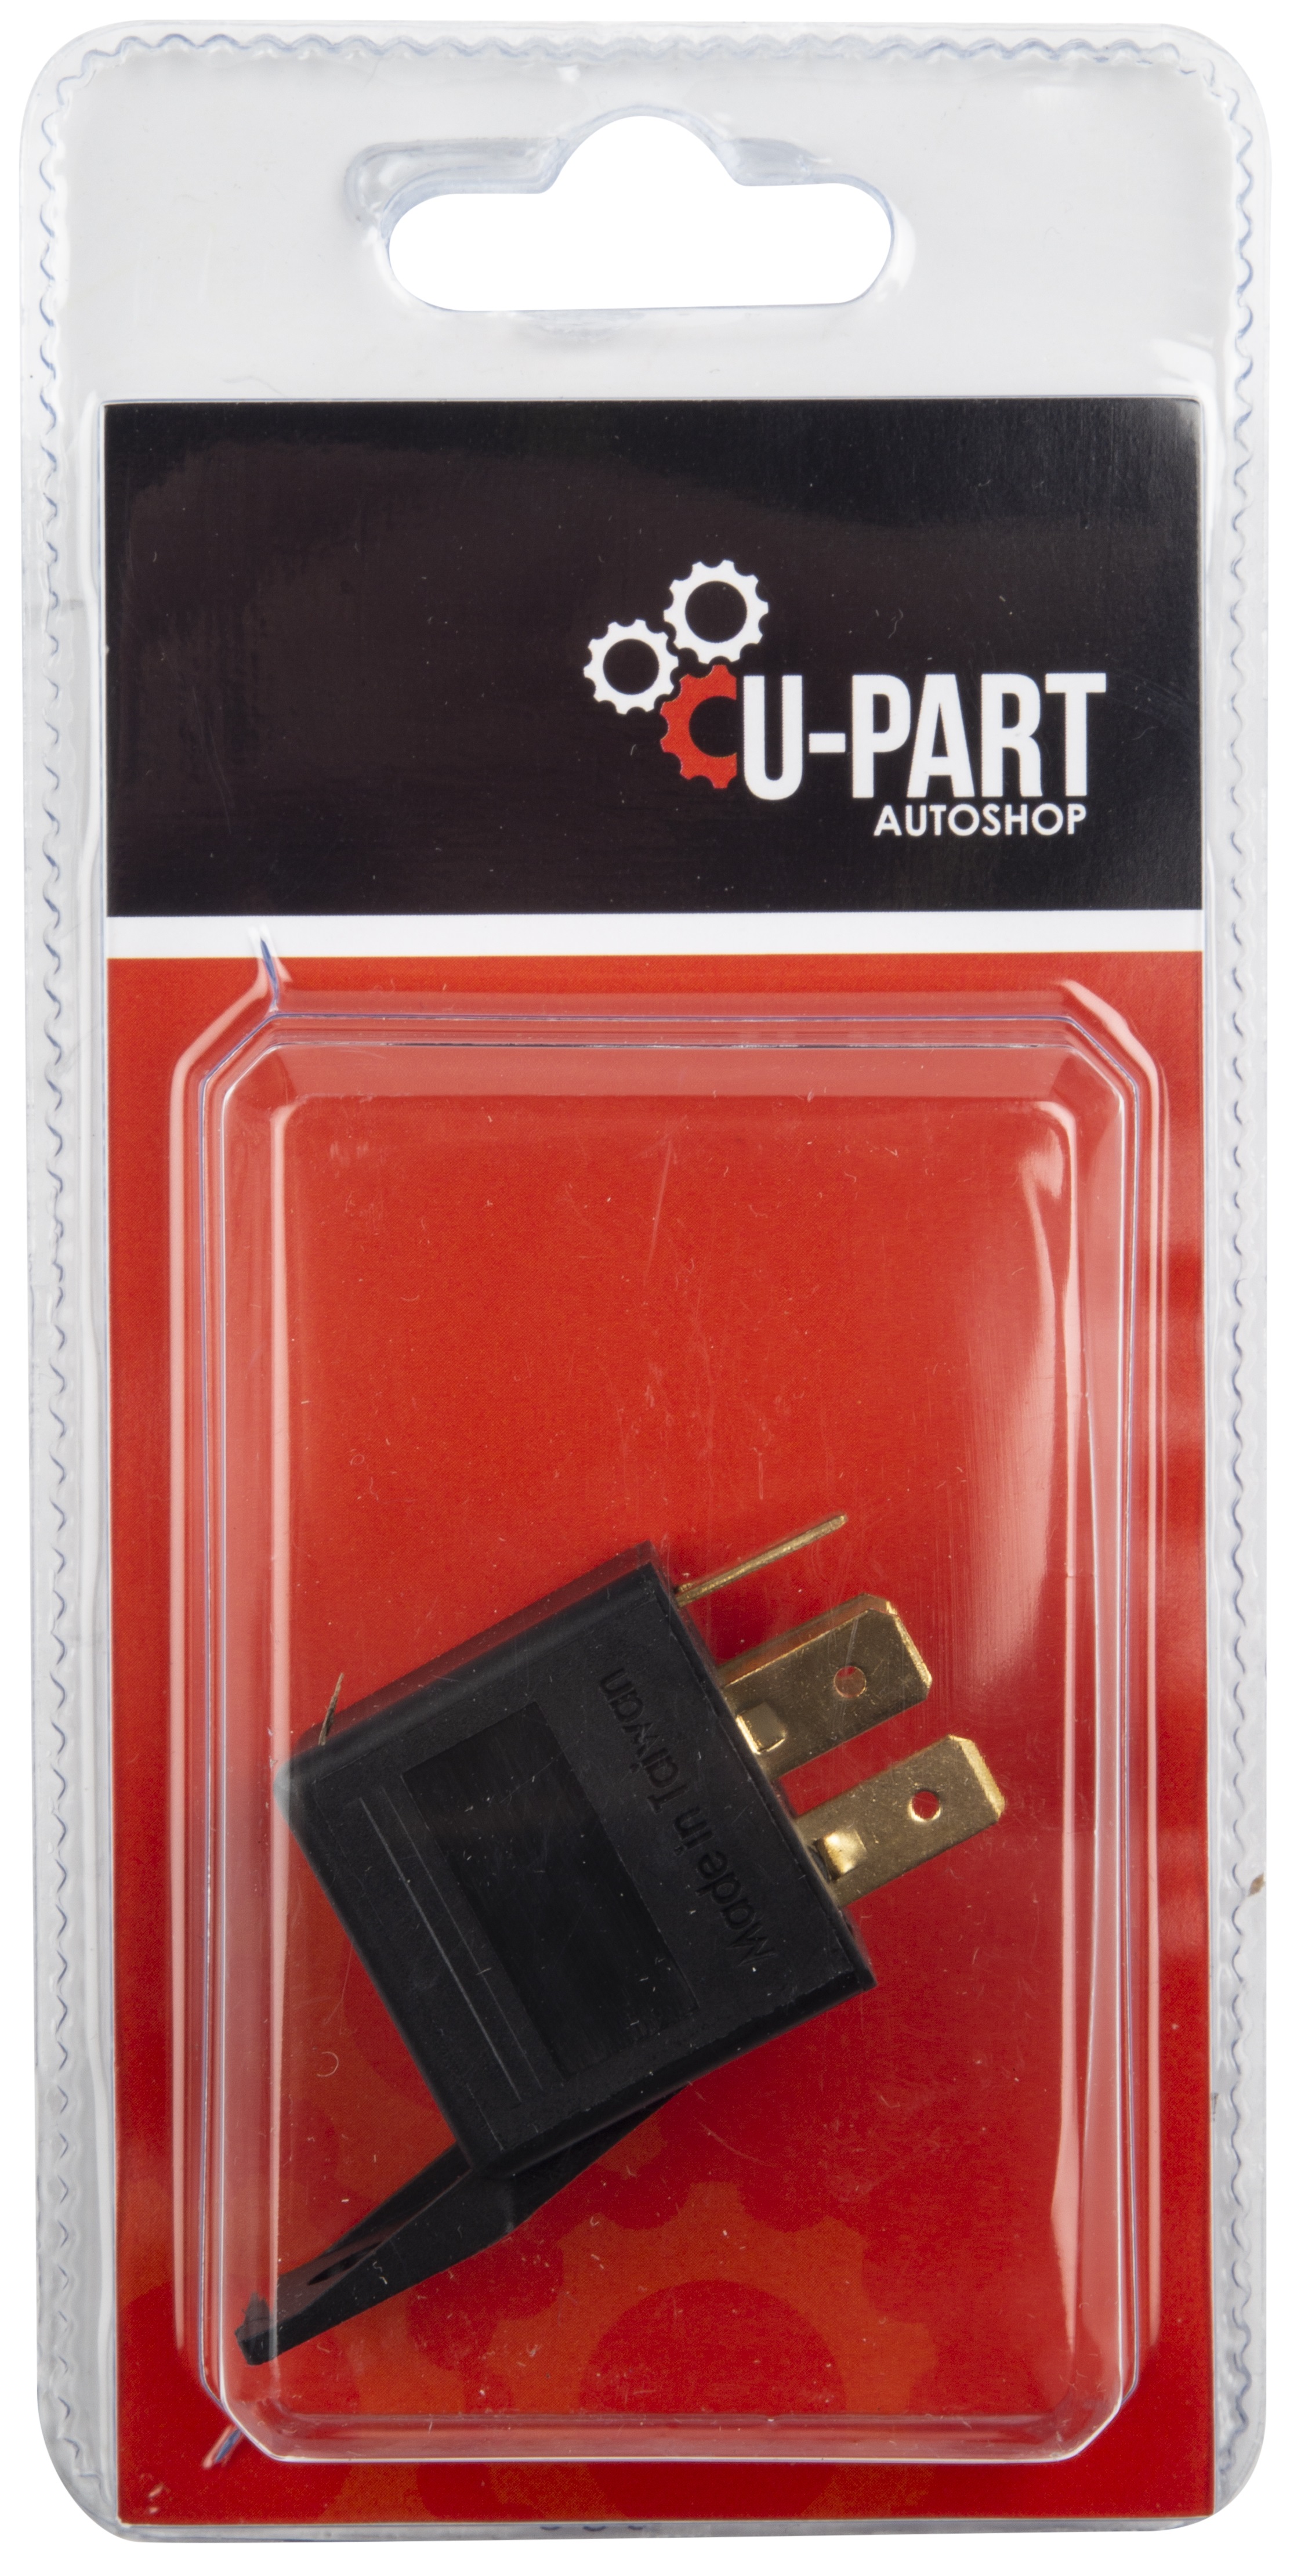 U-Part 12V Autoshop Relay Provides Reliable And Efficient Electrical Switching For Automotive Applications.Four-Pin Applications. Prepacked. Also Available Unpacked At Code AO330/0361.